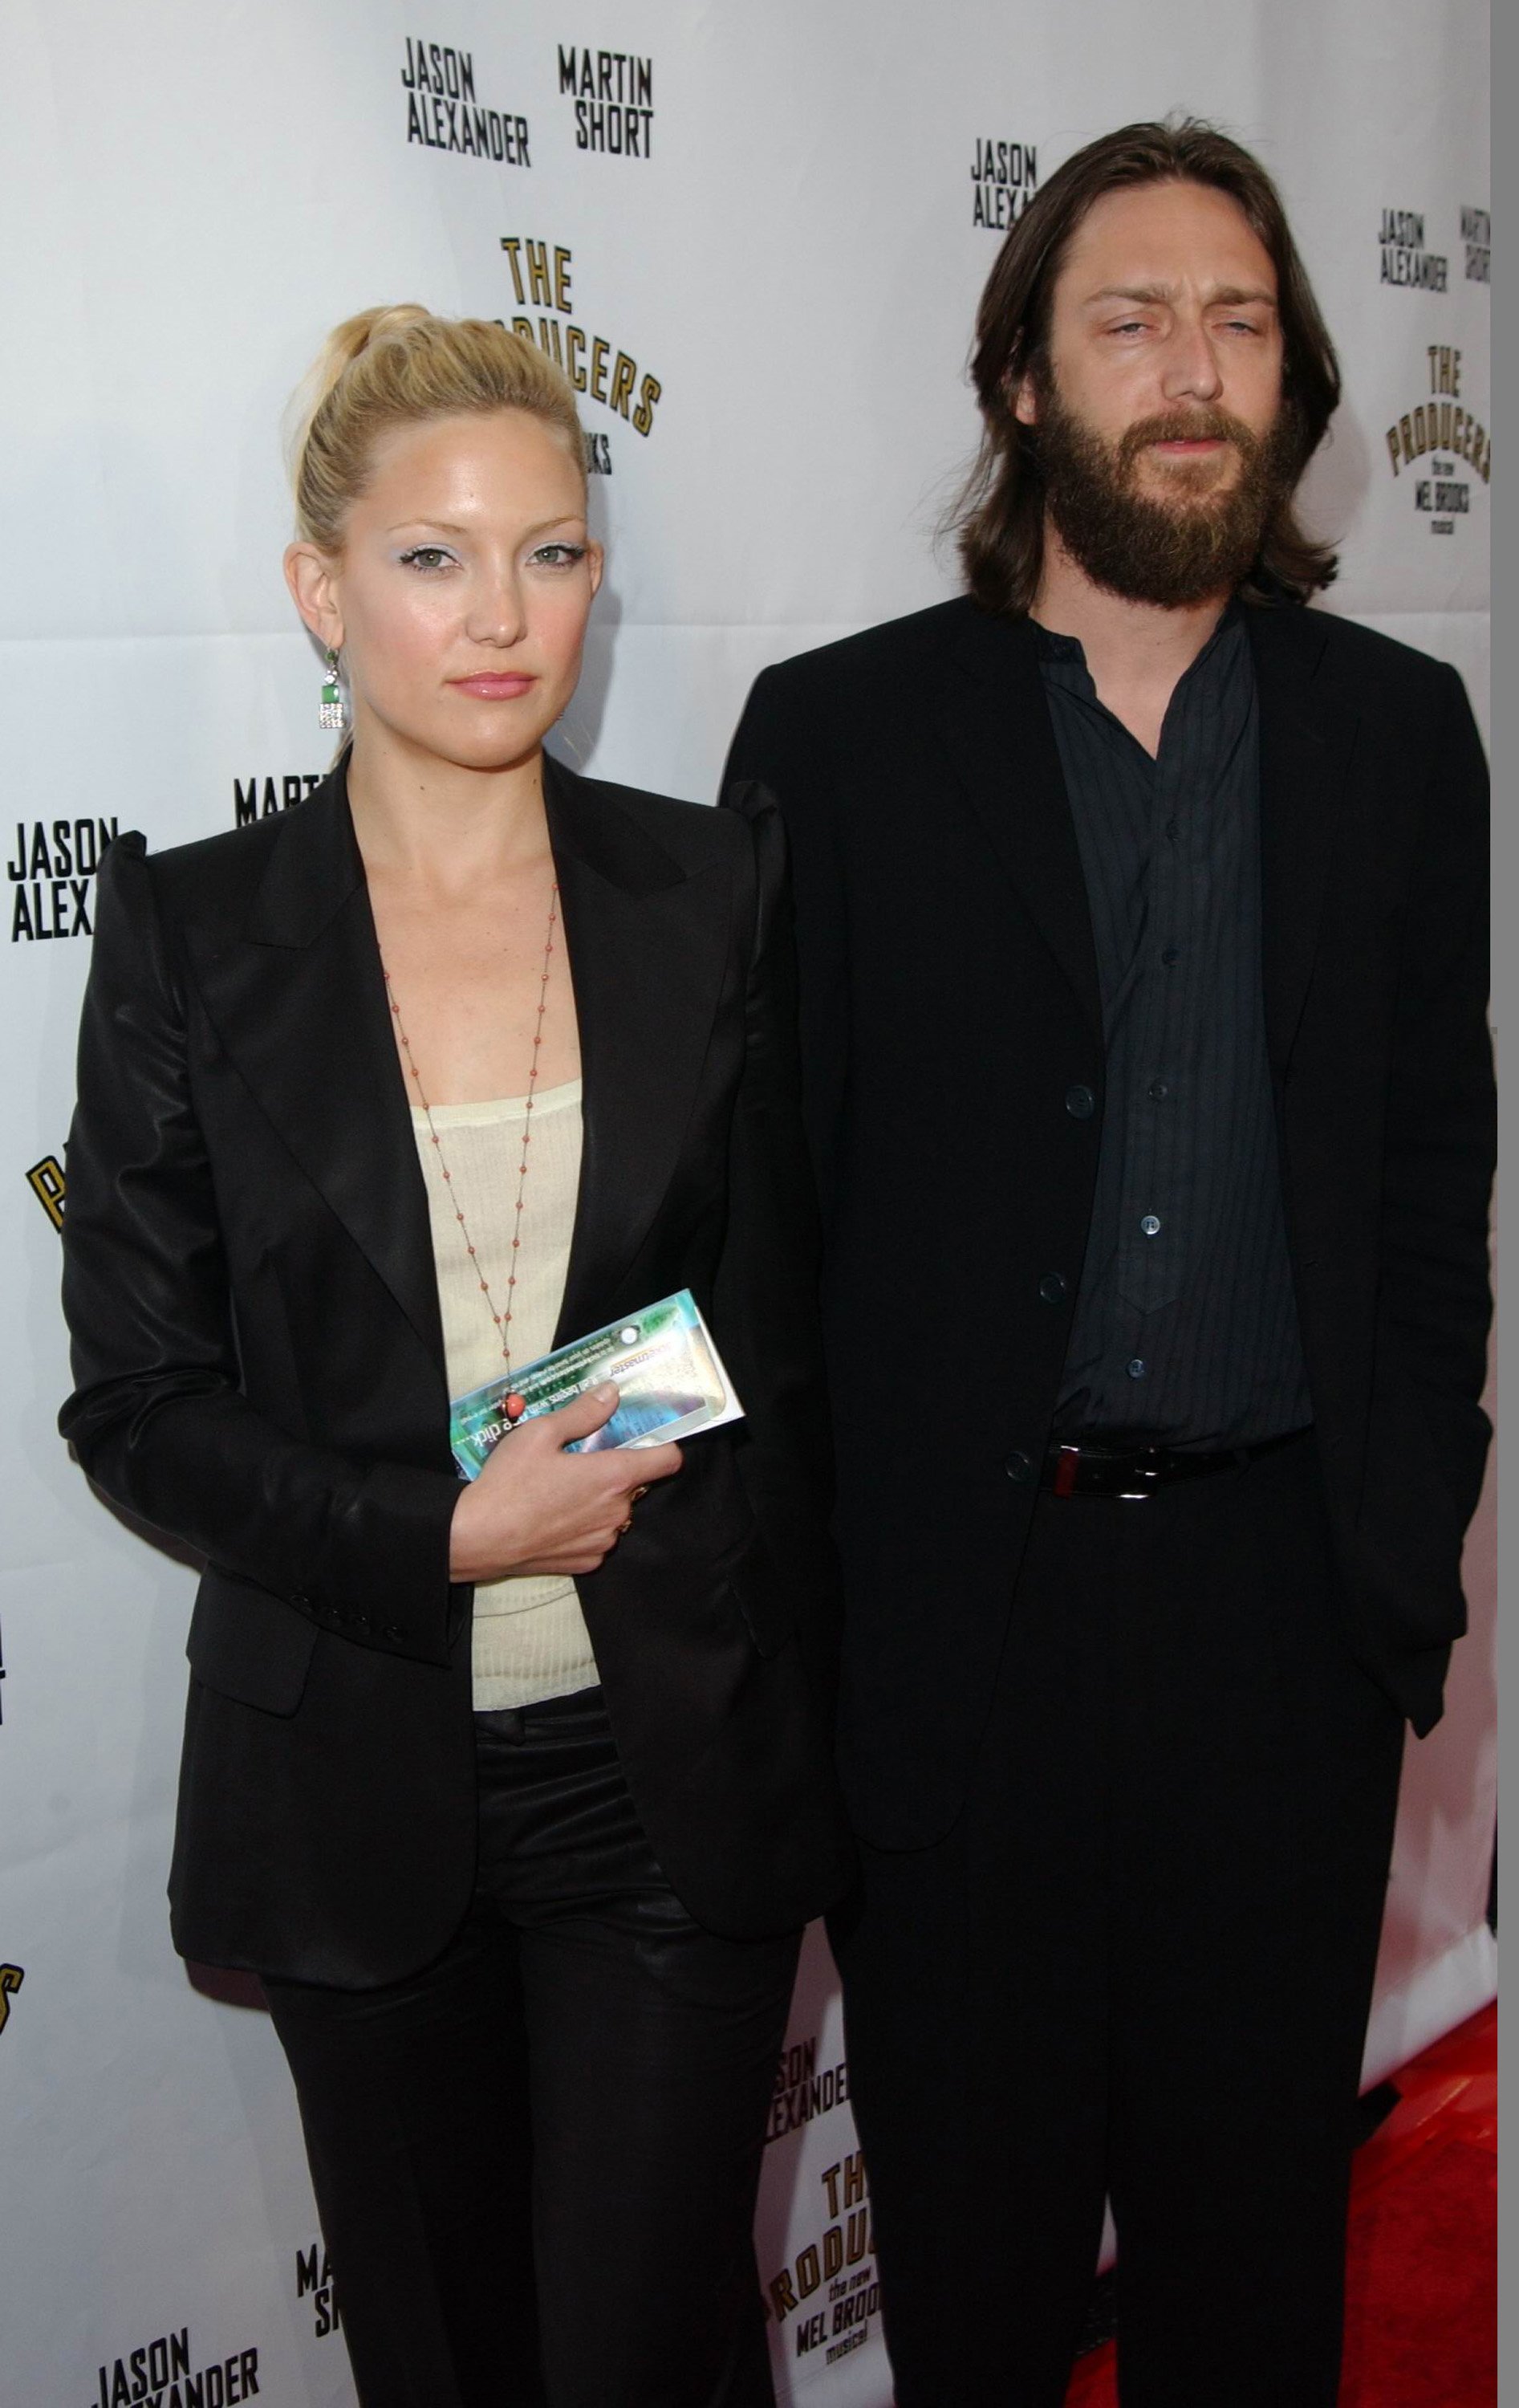 Kate Hudson & Chris Robinson during Opening Night of "The Producers" on May 29, 2003 at Pantages Theatre in Hollywood, California | Source: Getty Images